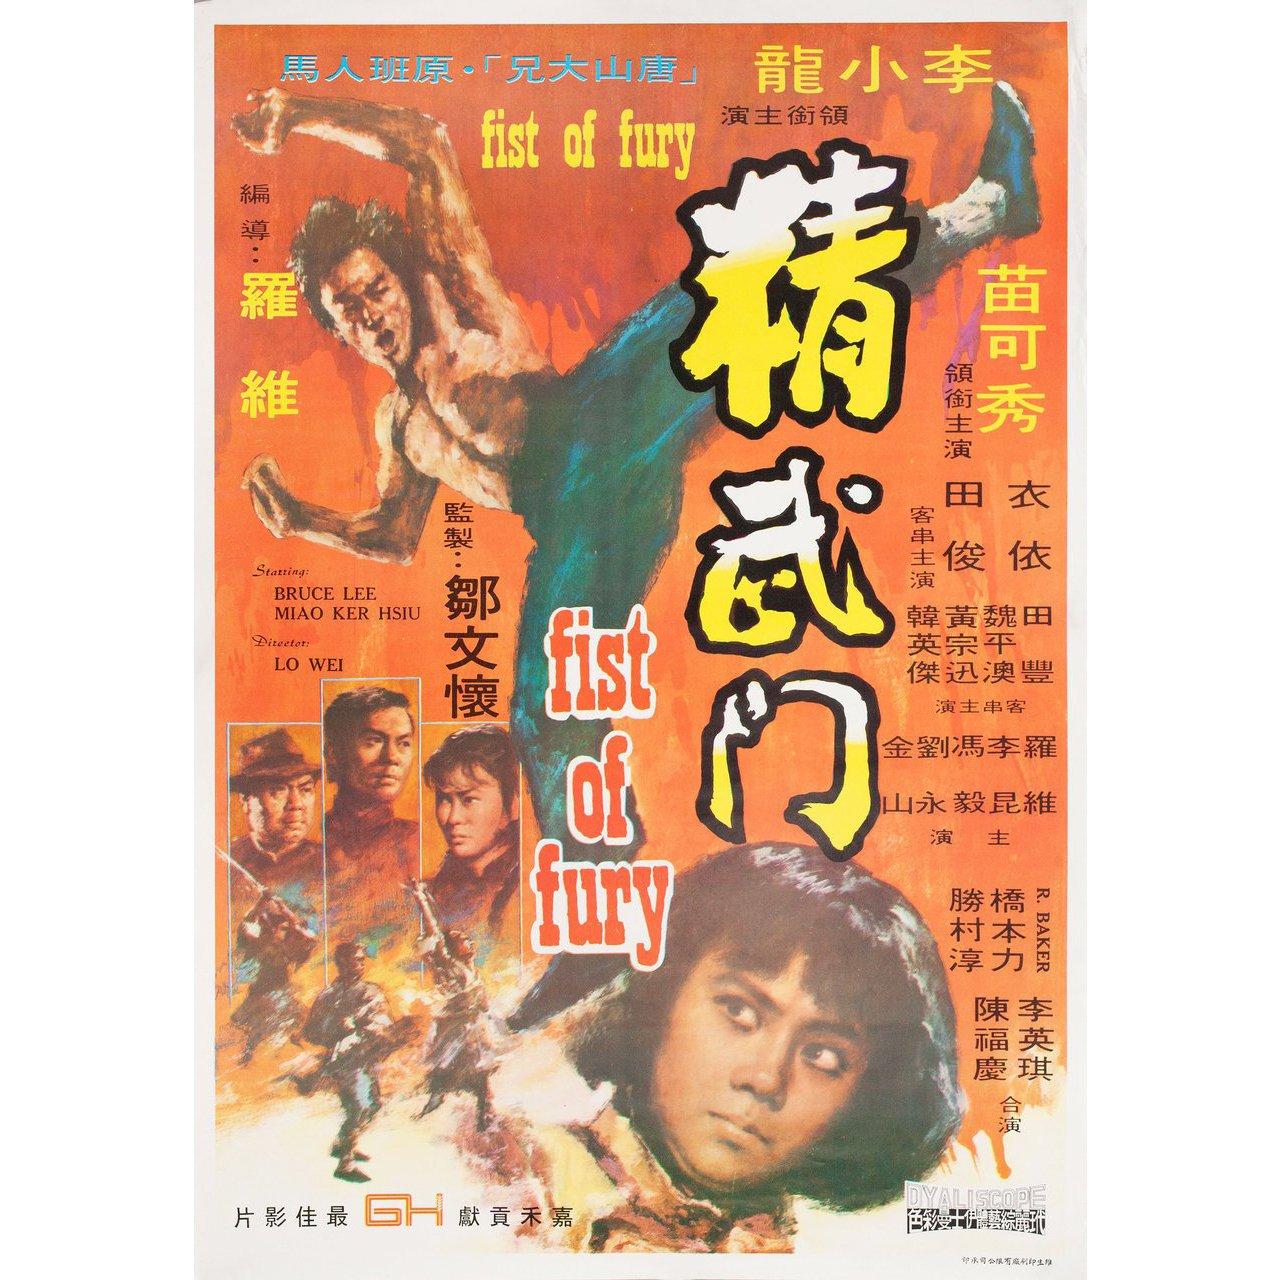 Original 1970s re-release Hong Kong poster for the film “Fists of Fury” (Tang shan da xiong) directed by Wei Lo / Chia-hsiang Wu with Bruce Lee / Maria Yi / James Tien / Marilyn Bautista. Very good-fine condition, rolled. Please note: the size is